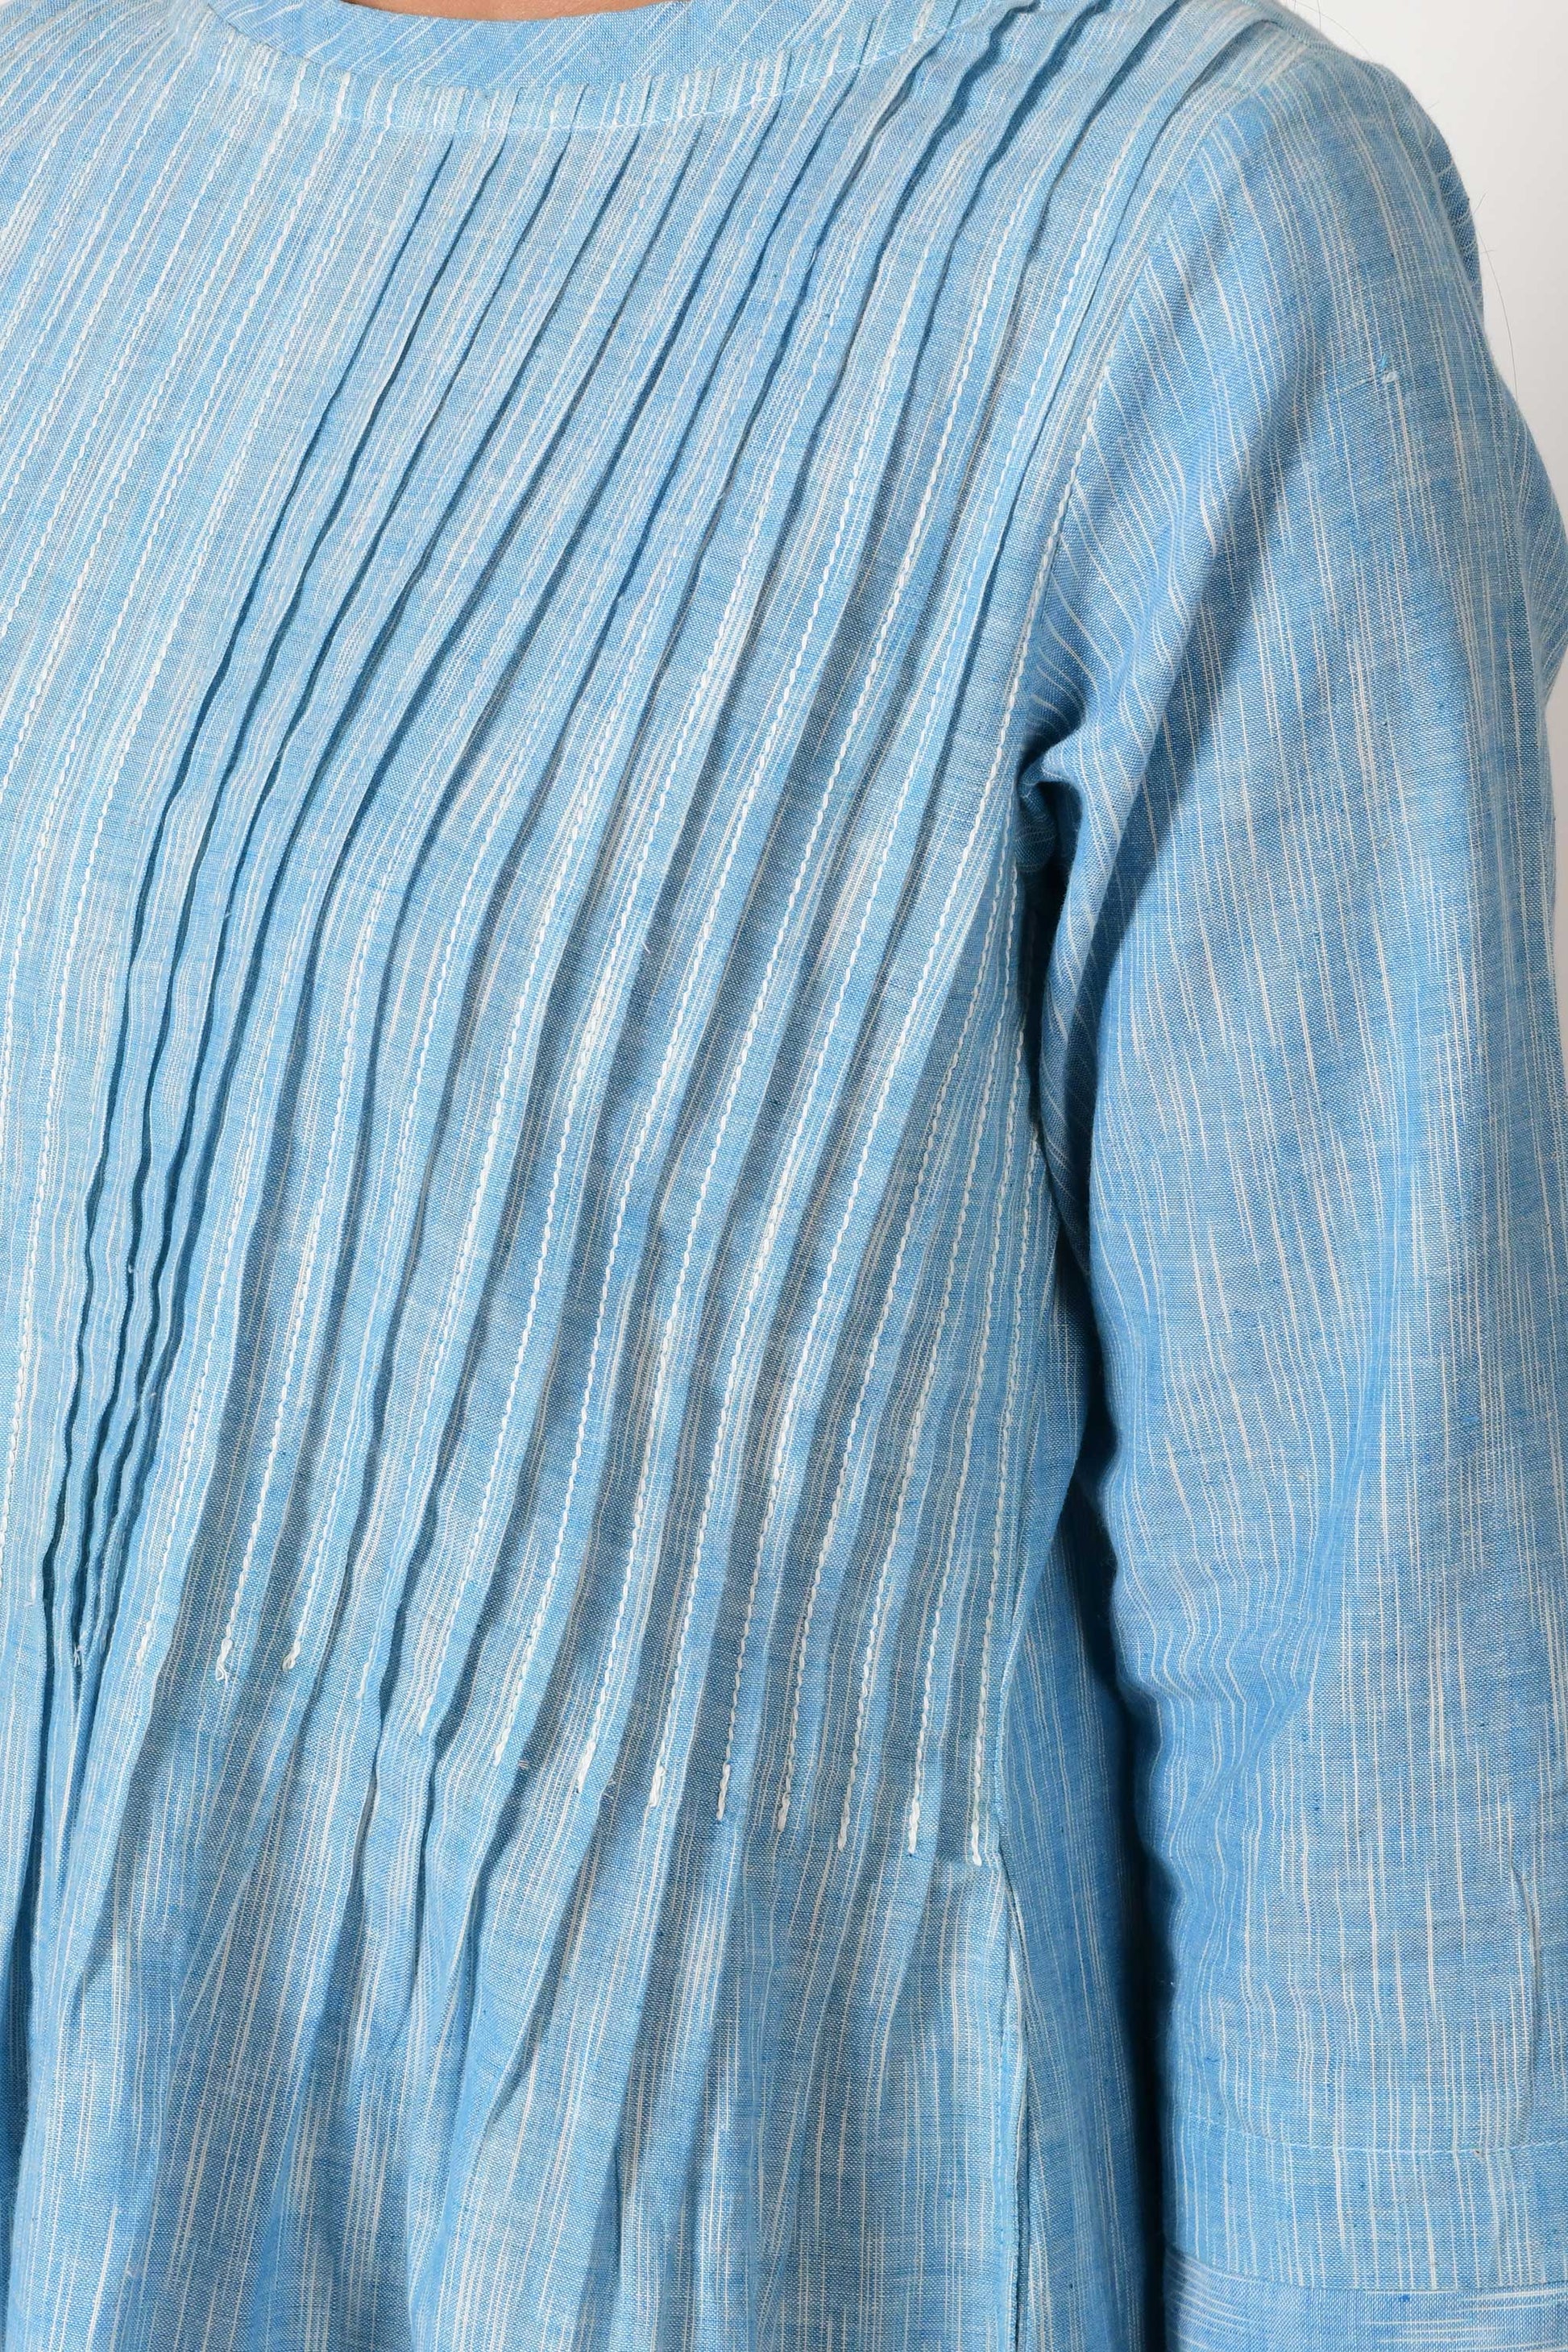 close up of knife pleats on the bust of the blue textured cotton dress made of hand spun and hand woven cotton.